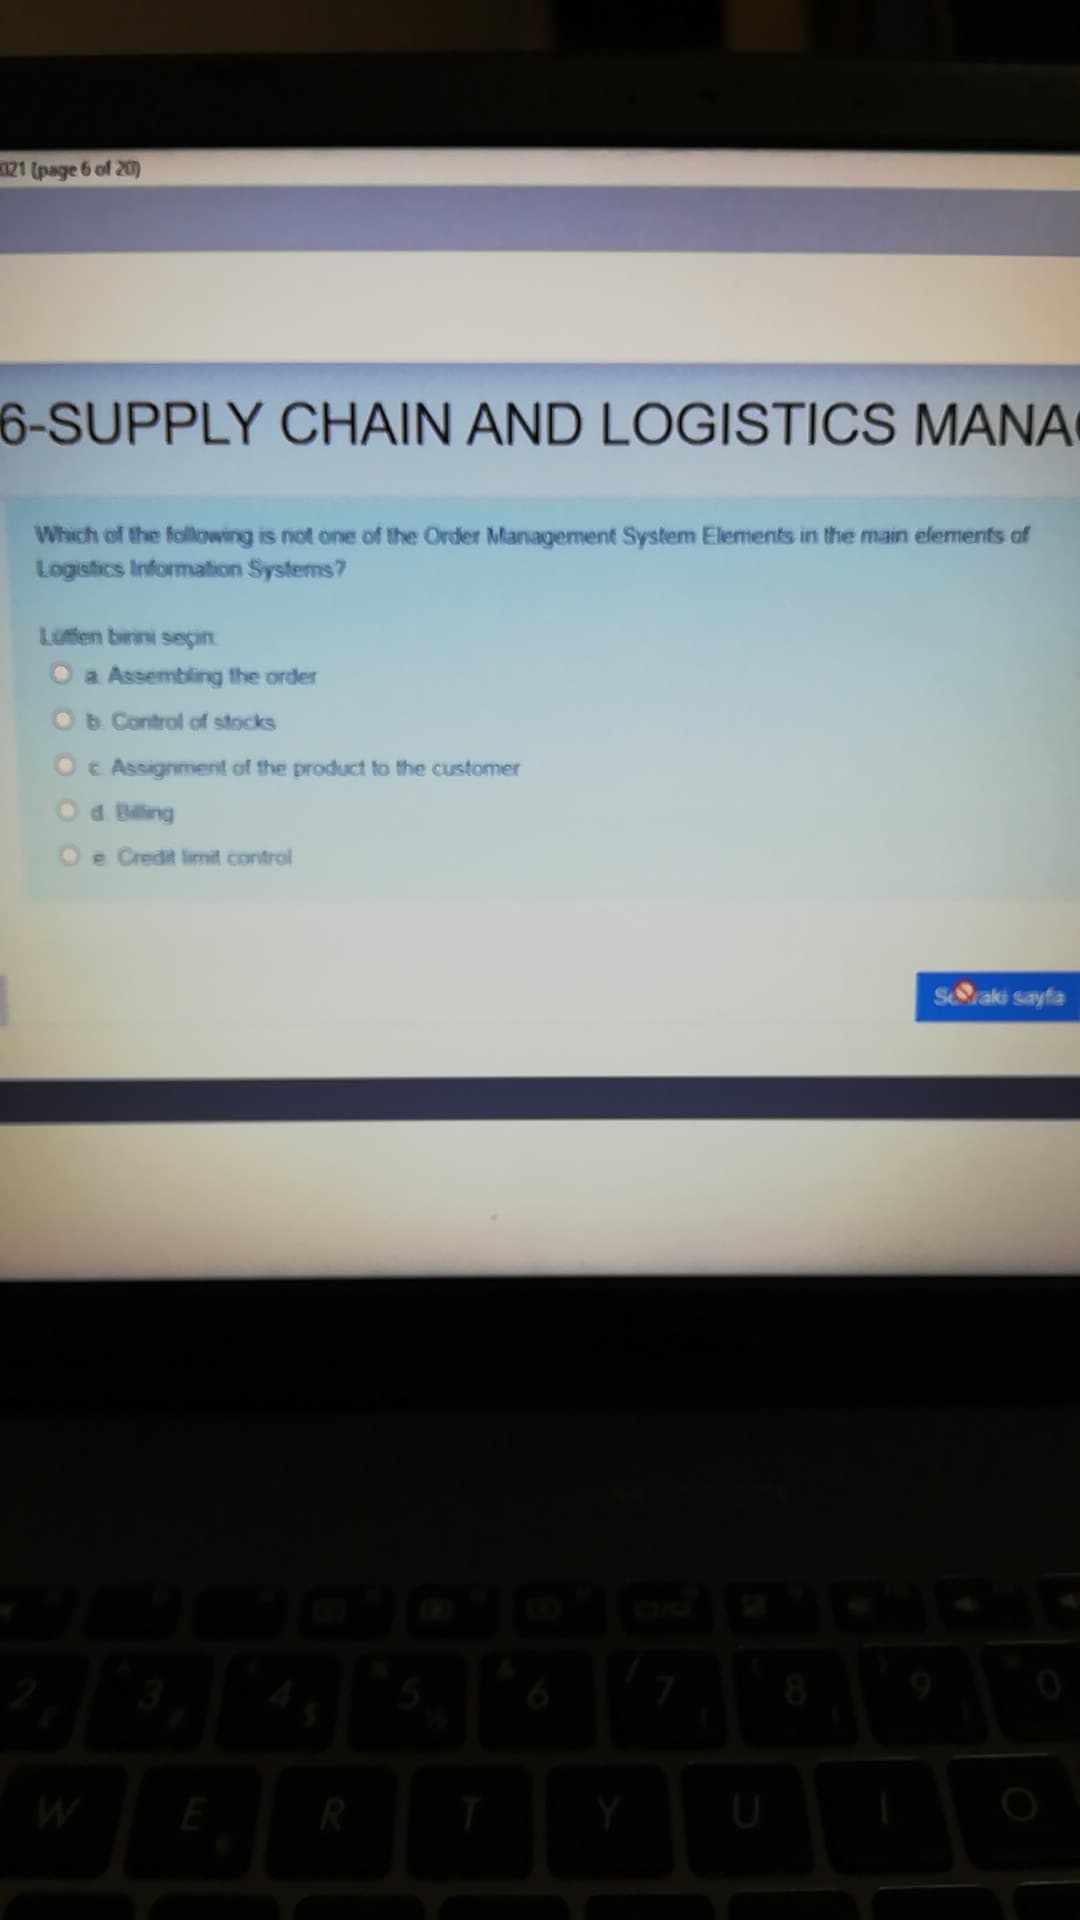 121 (page 6 of 20)
6-SUPPLY CHAIN AND LOGISTICS MANA
Which of the following is not one of the Order Management System Elements in the main elements of
Logistics Information Systems?
Lutfen birini seçin
O a Assembling the order
Ob Control of stocks
Oc Assignment of the product to the customer
Od Biling
O e Credit limit control
S&raki sayfa
W
R
